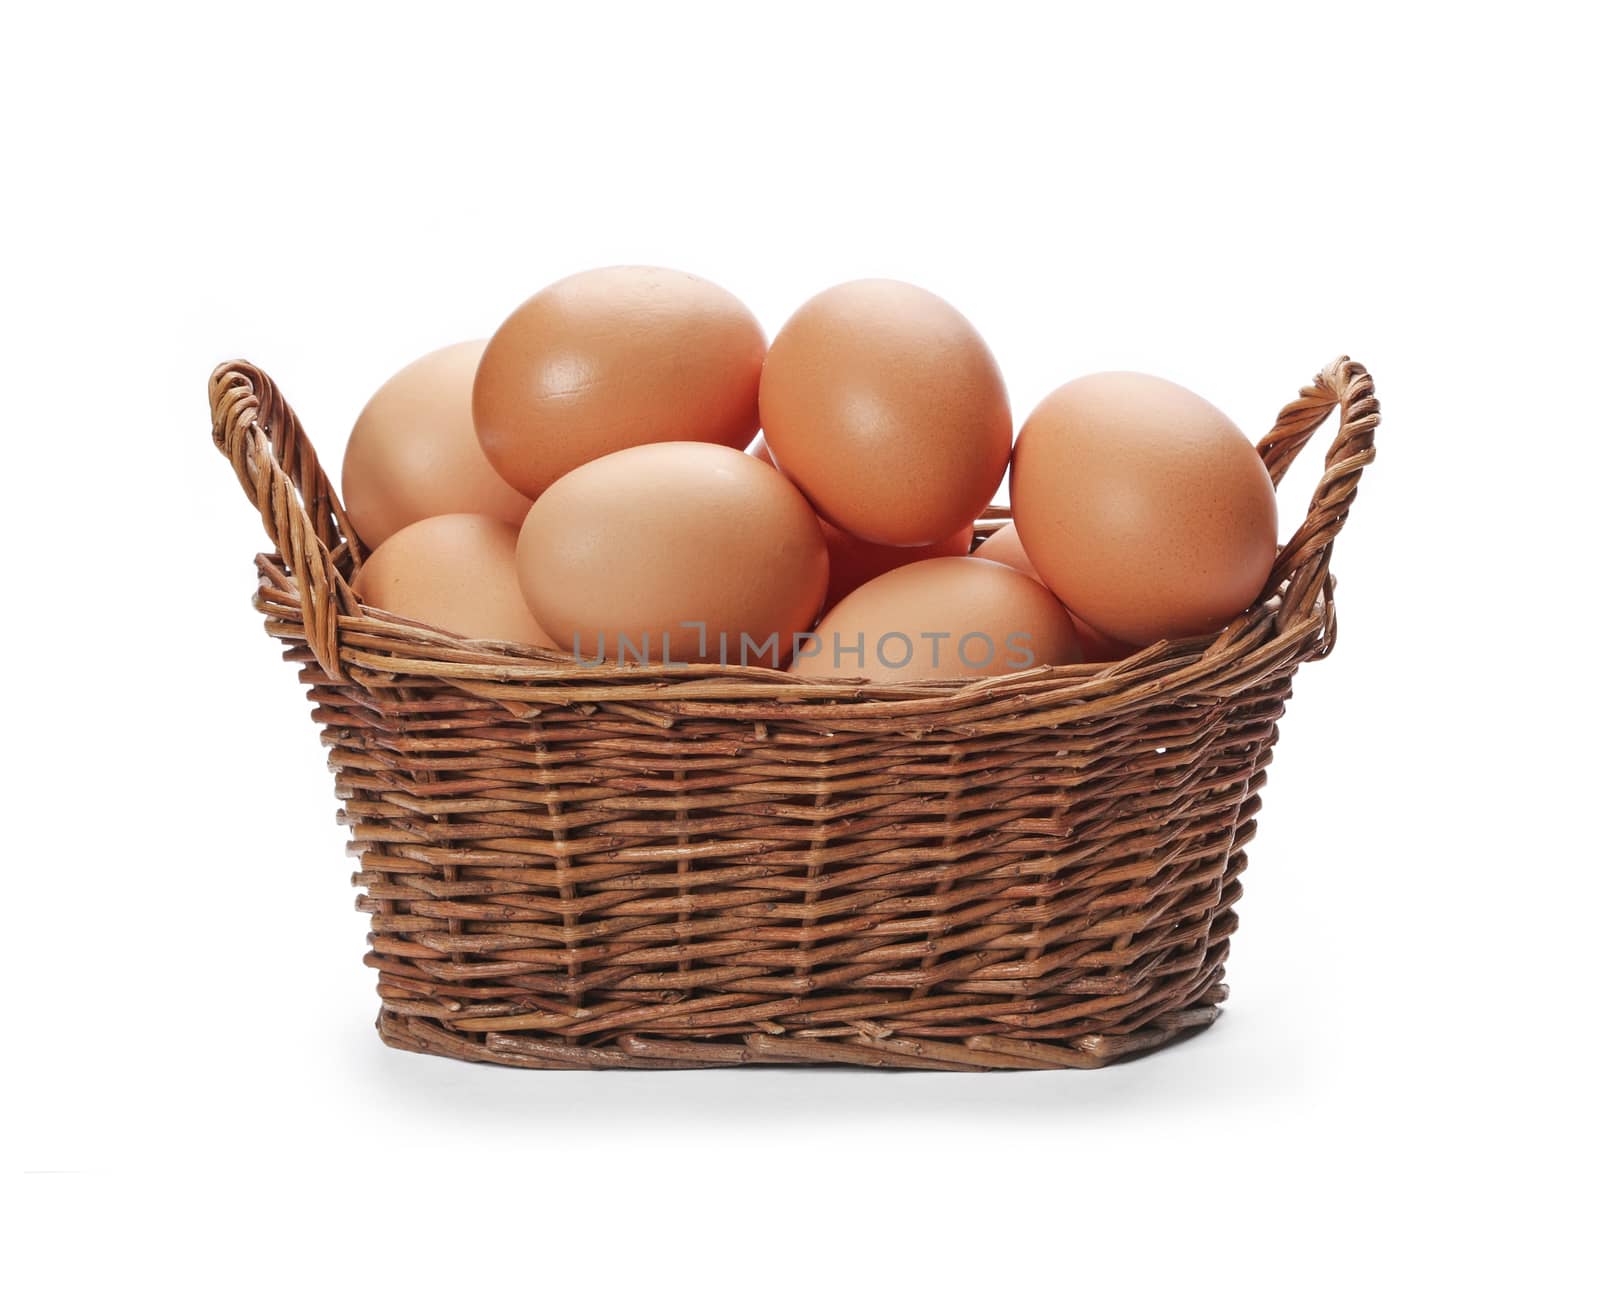 Brown eggs in the basket isolated on white background.